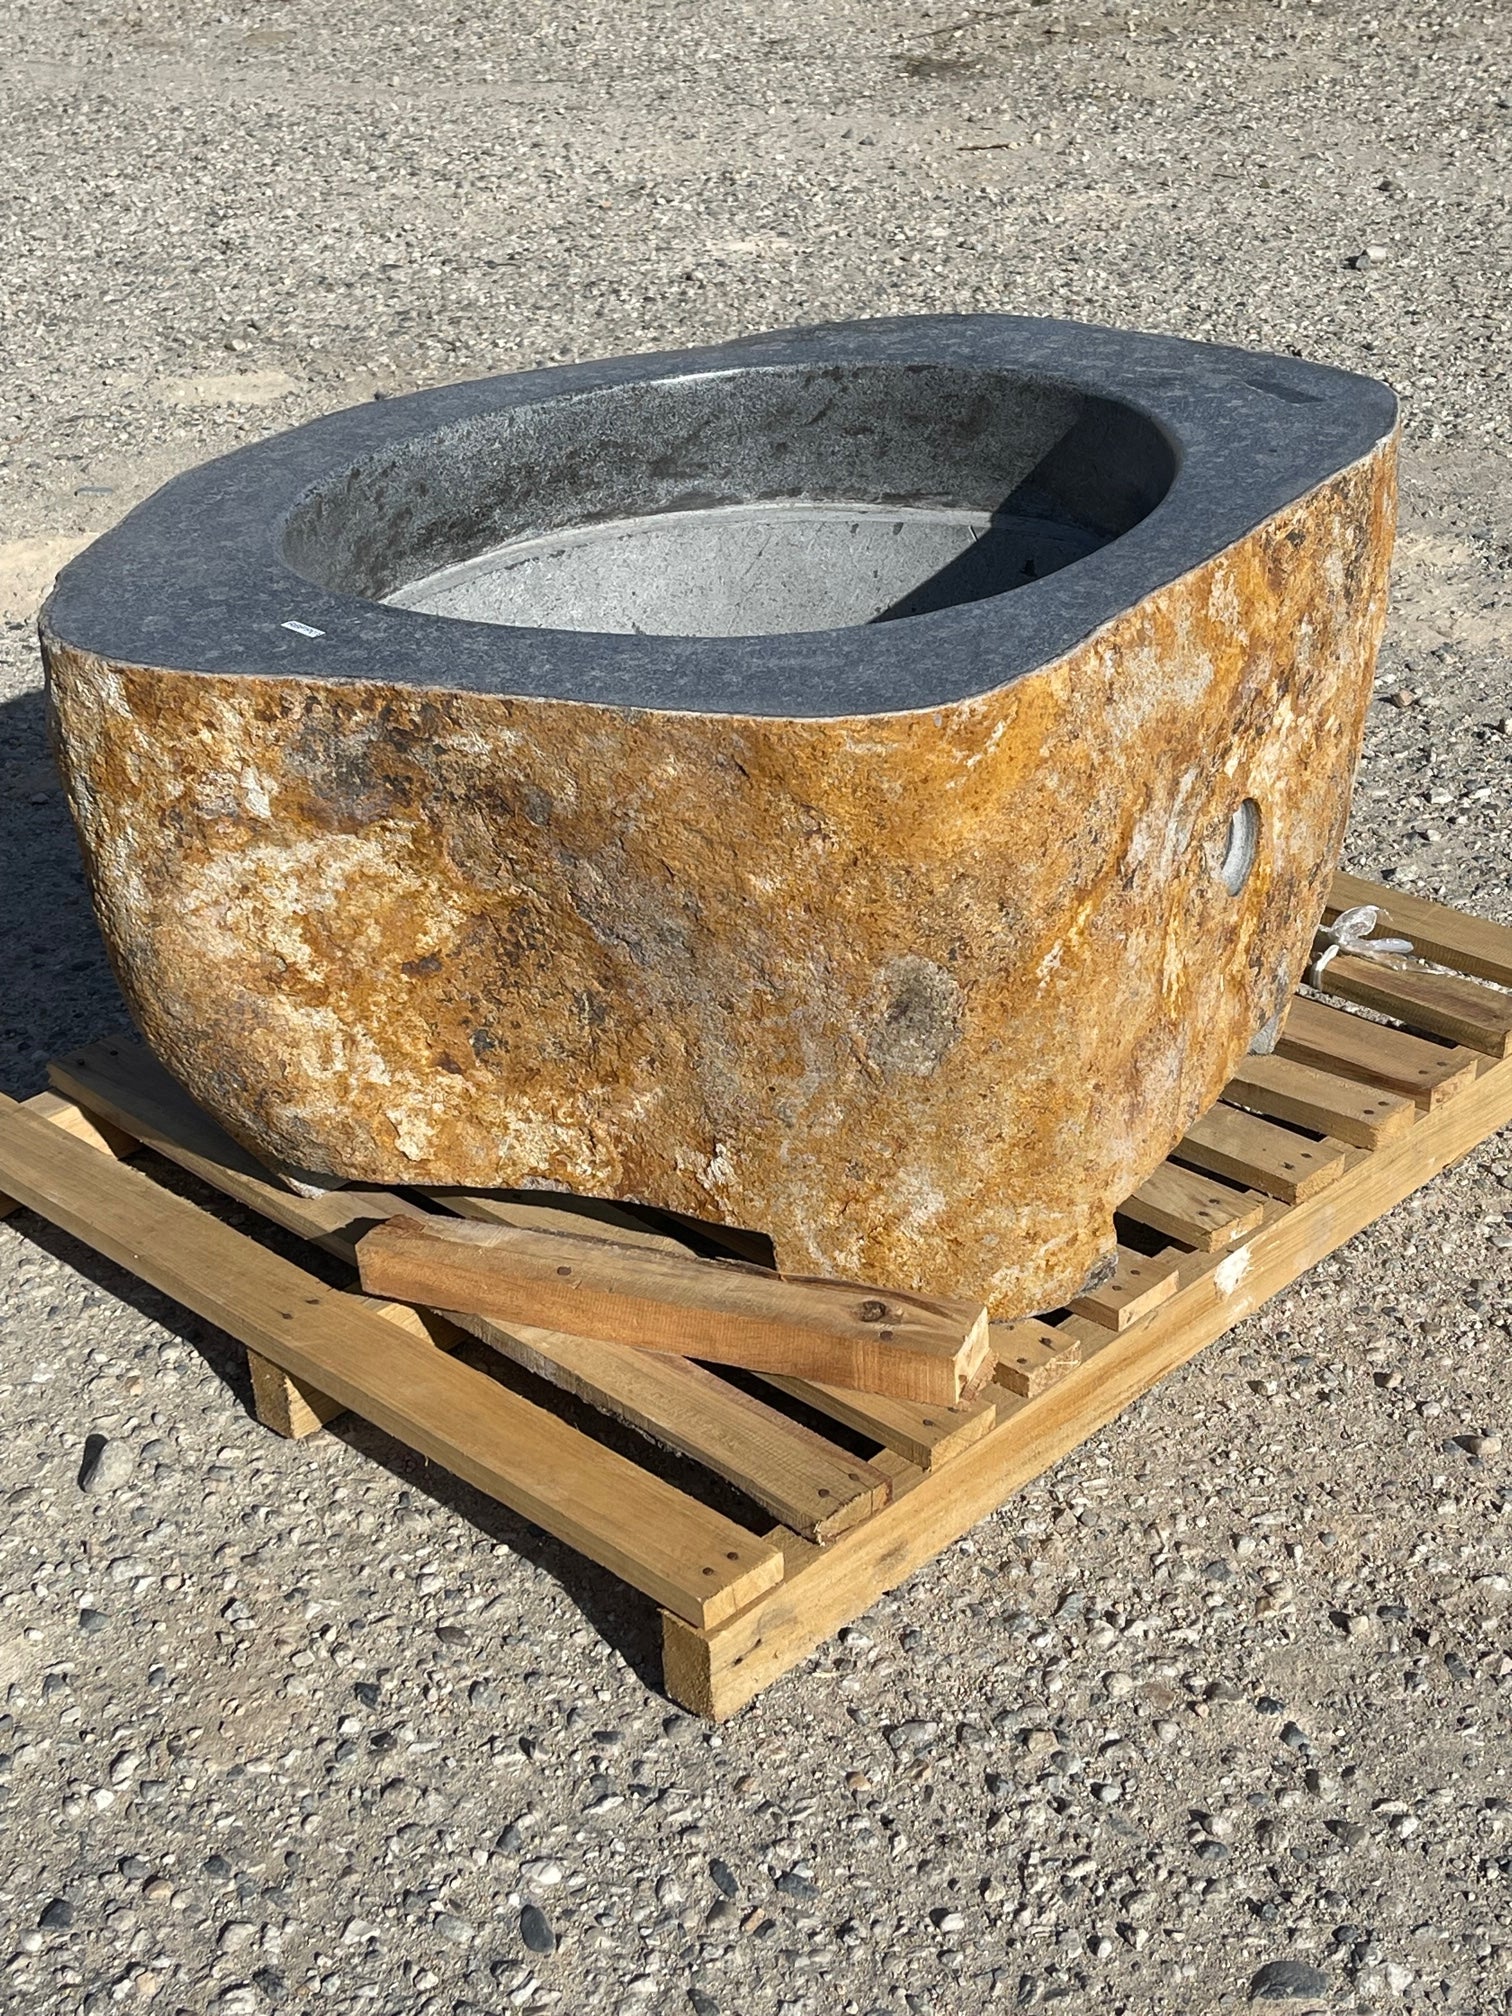 Real rock boulder or stone propane or natural gas burning fire pits from Impact Imports